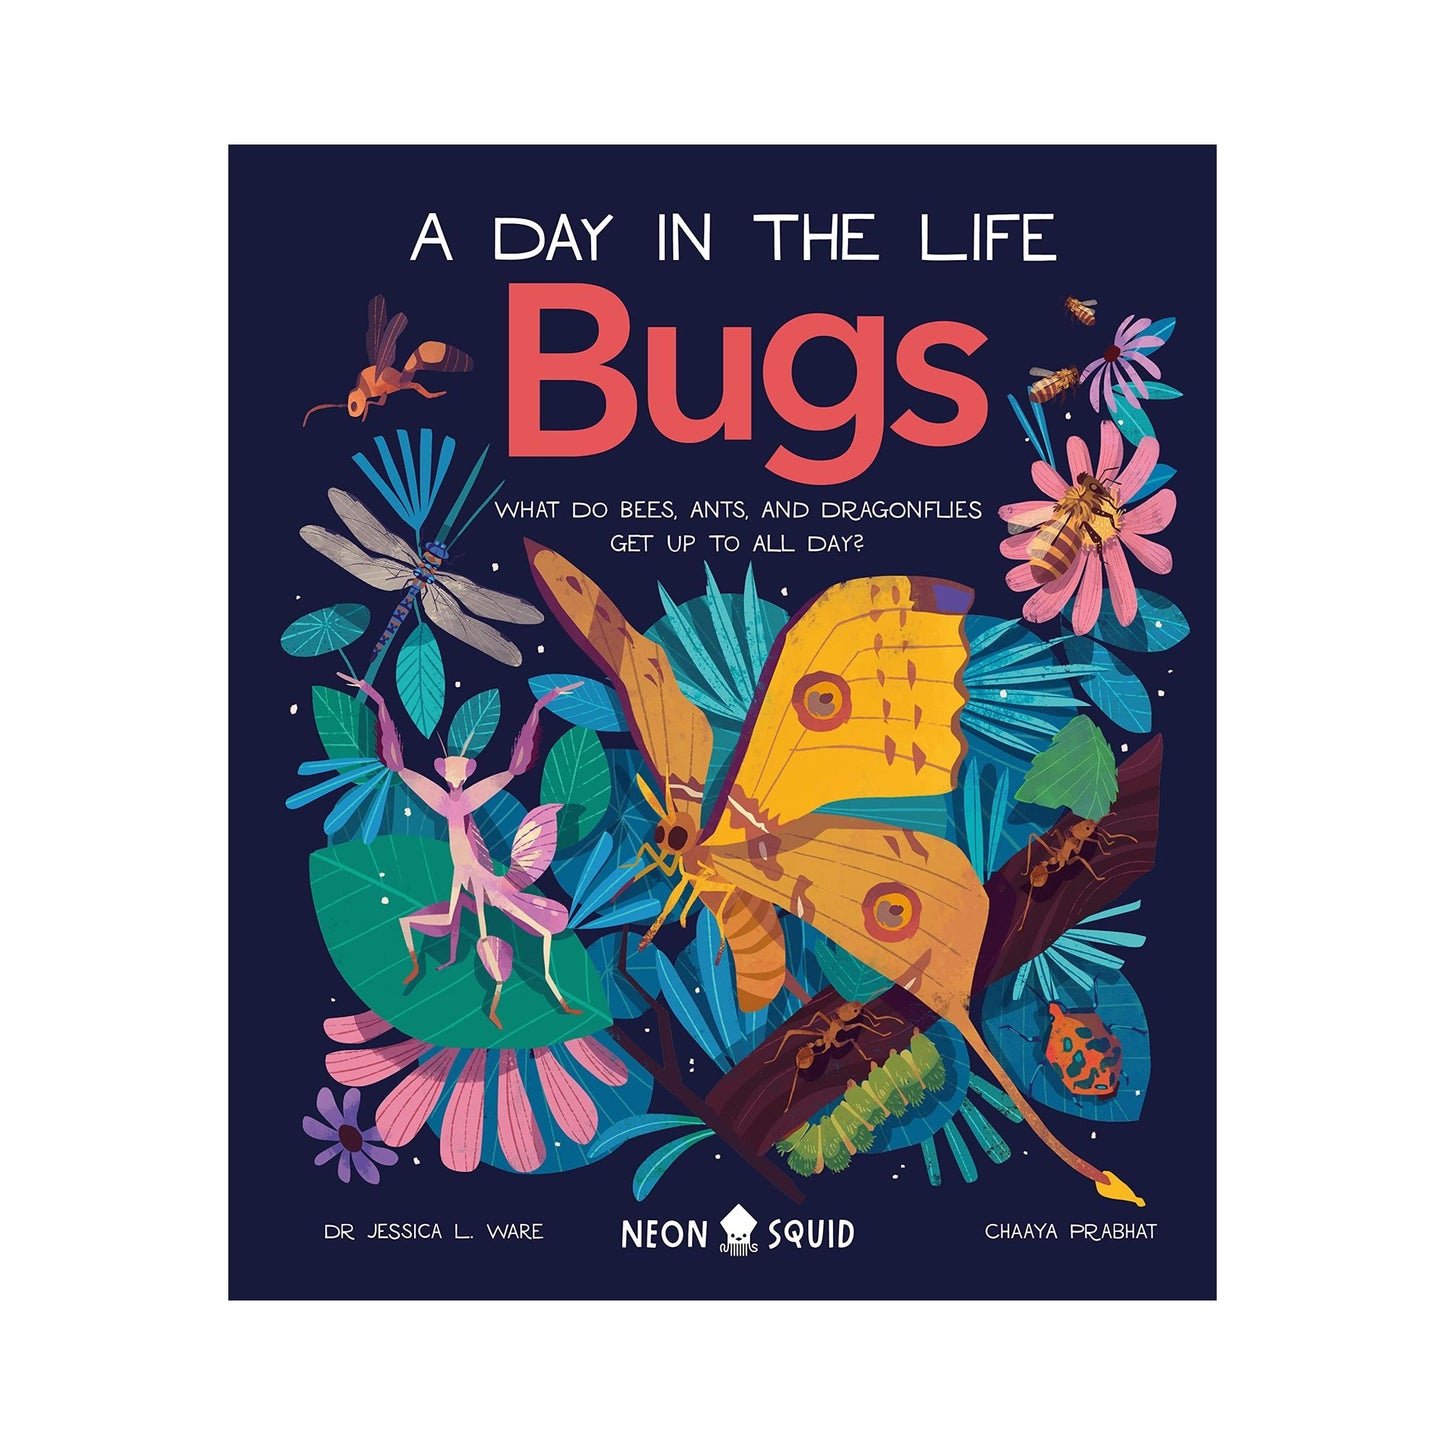 A Day in the Life: Bugs